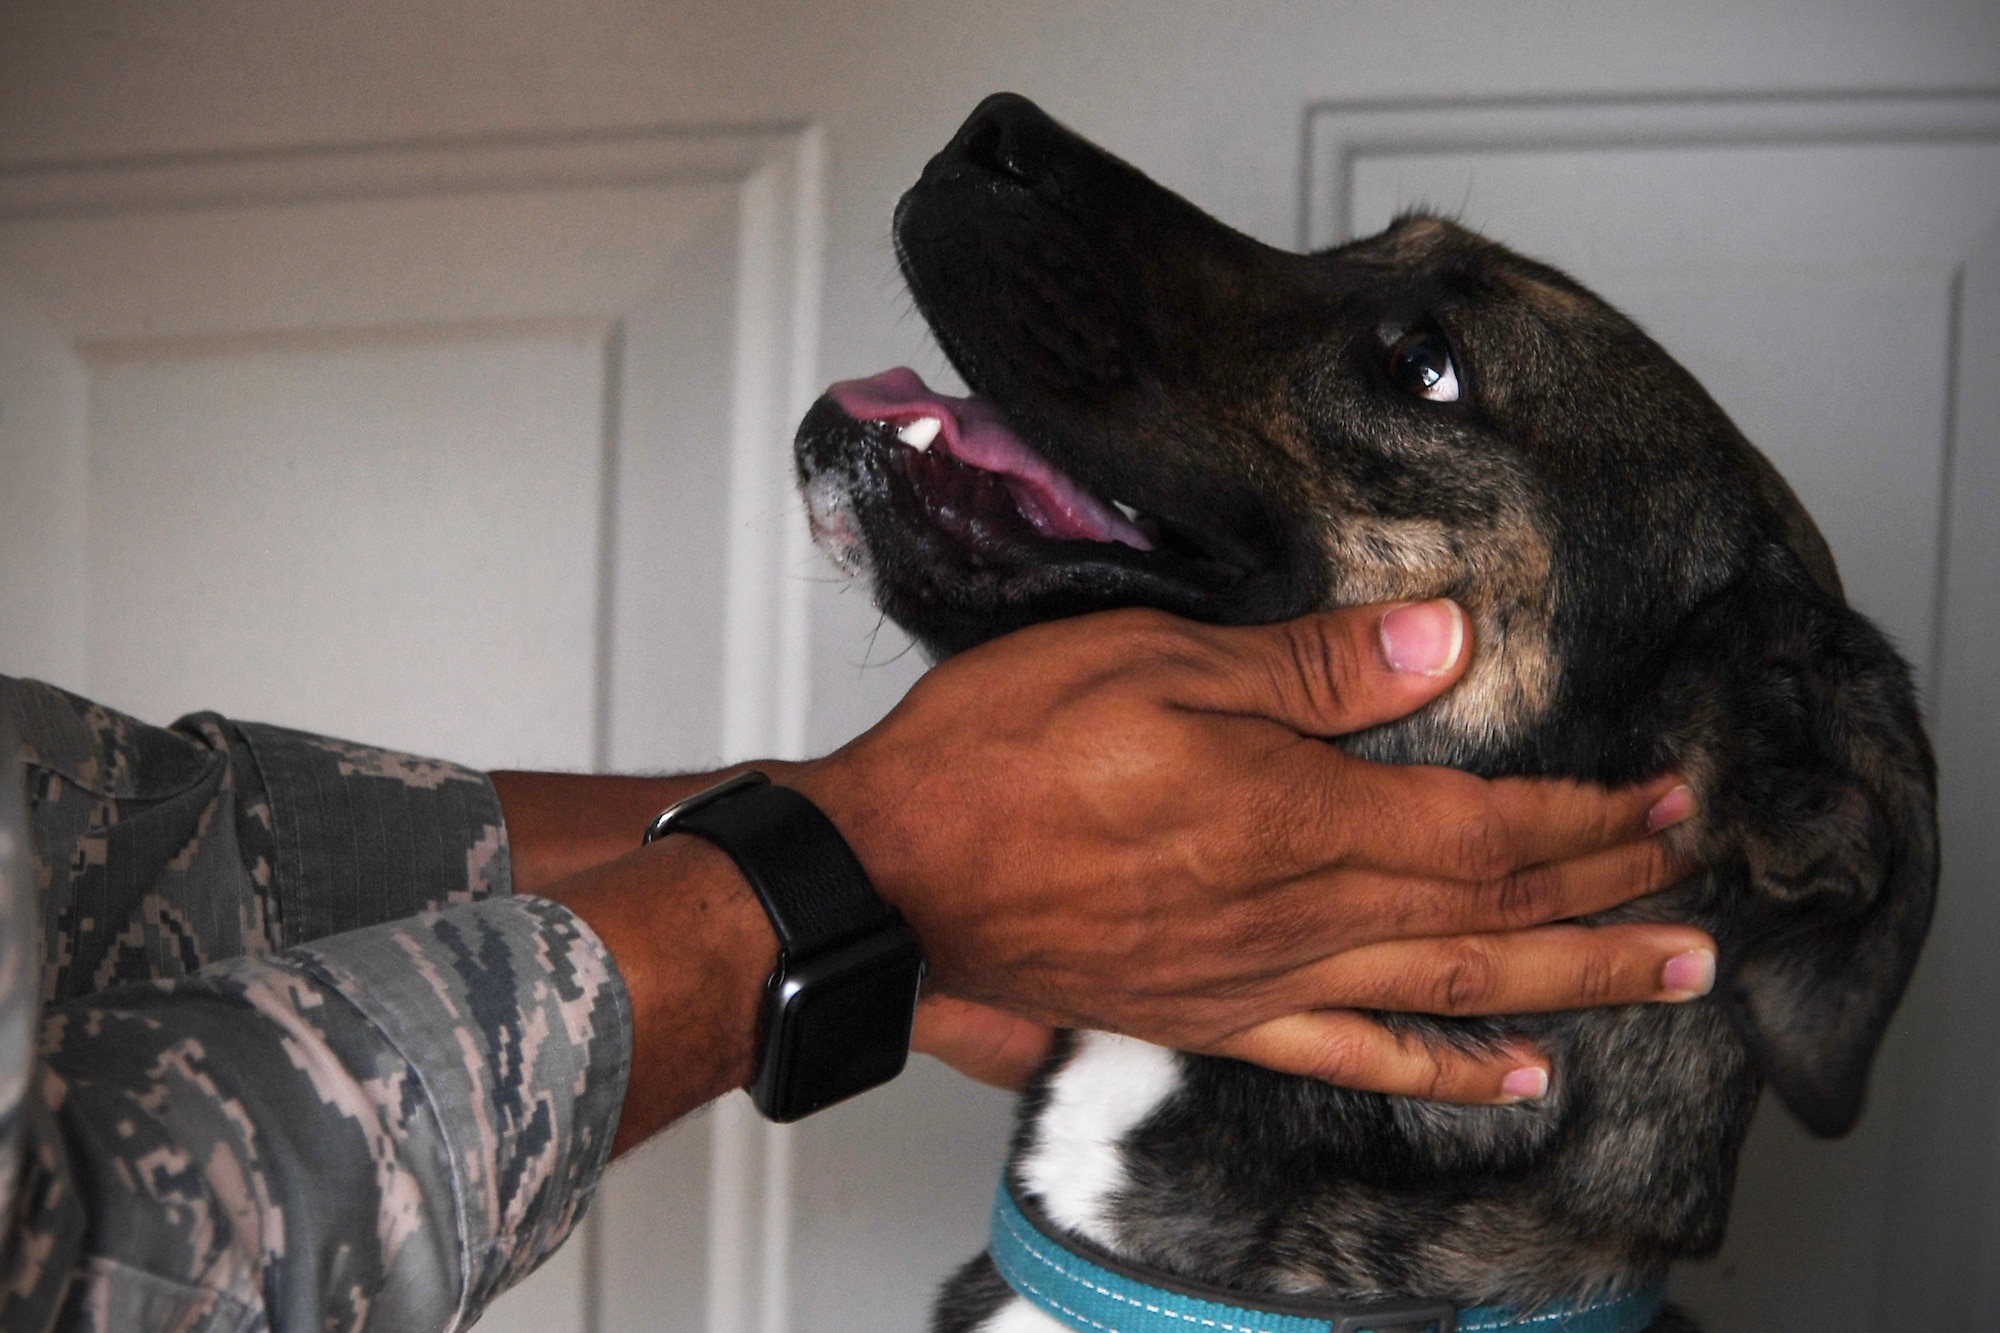 Memphis, a 2-year-old Australian Cattle Dog mix, is greeted by his owner, Senior Airman Elijaih Tiggs, 319th Reconnaissance Wing photojournalist journeyman, Sept. 18, 2019, on Grand Forks Air Force Base, North Dakota. Spending time with Memphis is how Tiggs says he decompresses from work: “His energy and personality just make me happy.” (U.S. Air Force photo by Senior Airman Elora J. Martinez)